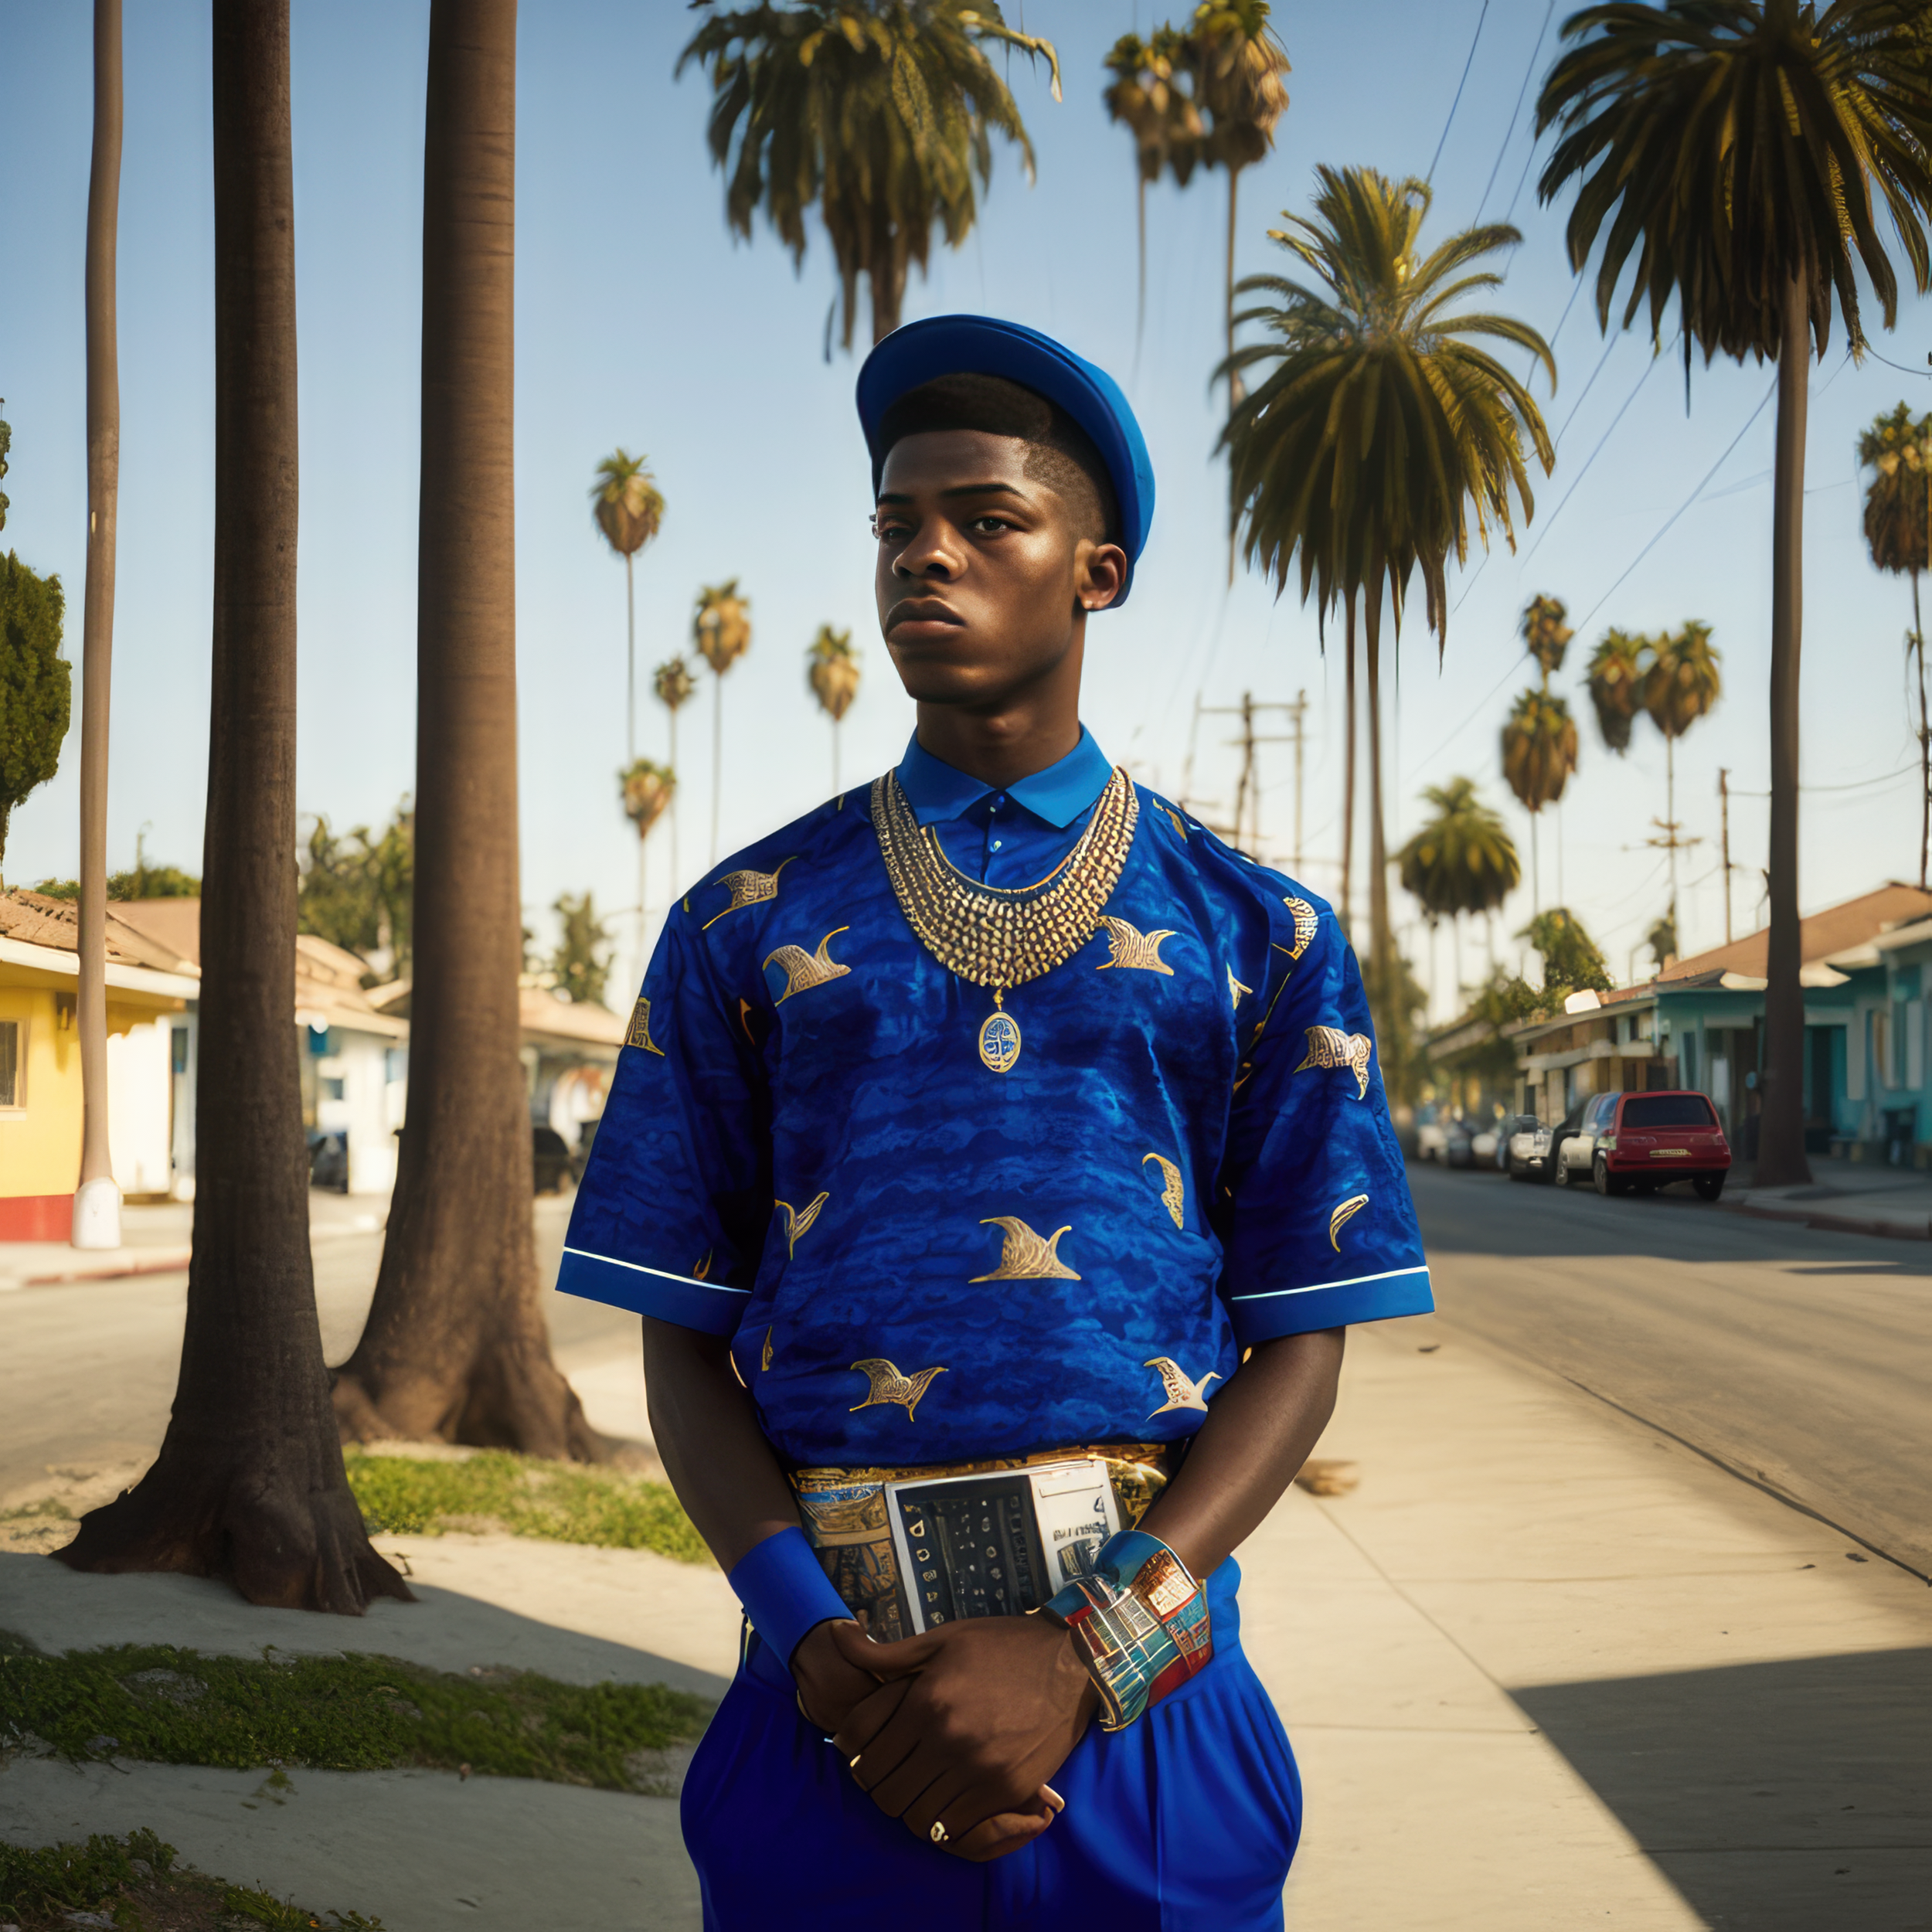 tonycncp_Photo_real_image_of_los_angeles_gangster_crip_standing_b70dd1a3-9d36-41f9-a3b5-2c4d2792c59a-gigapixel-standard-scale-6_00x.png